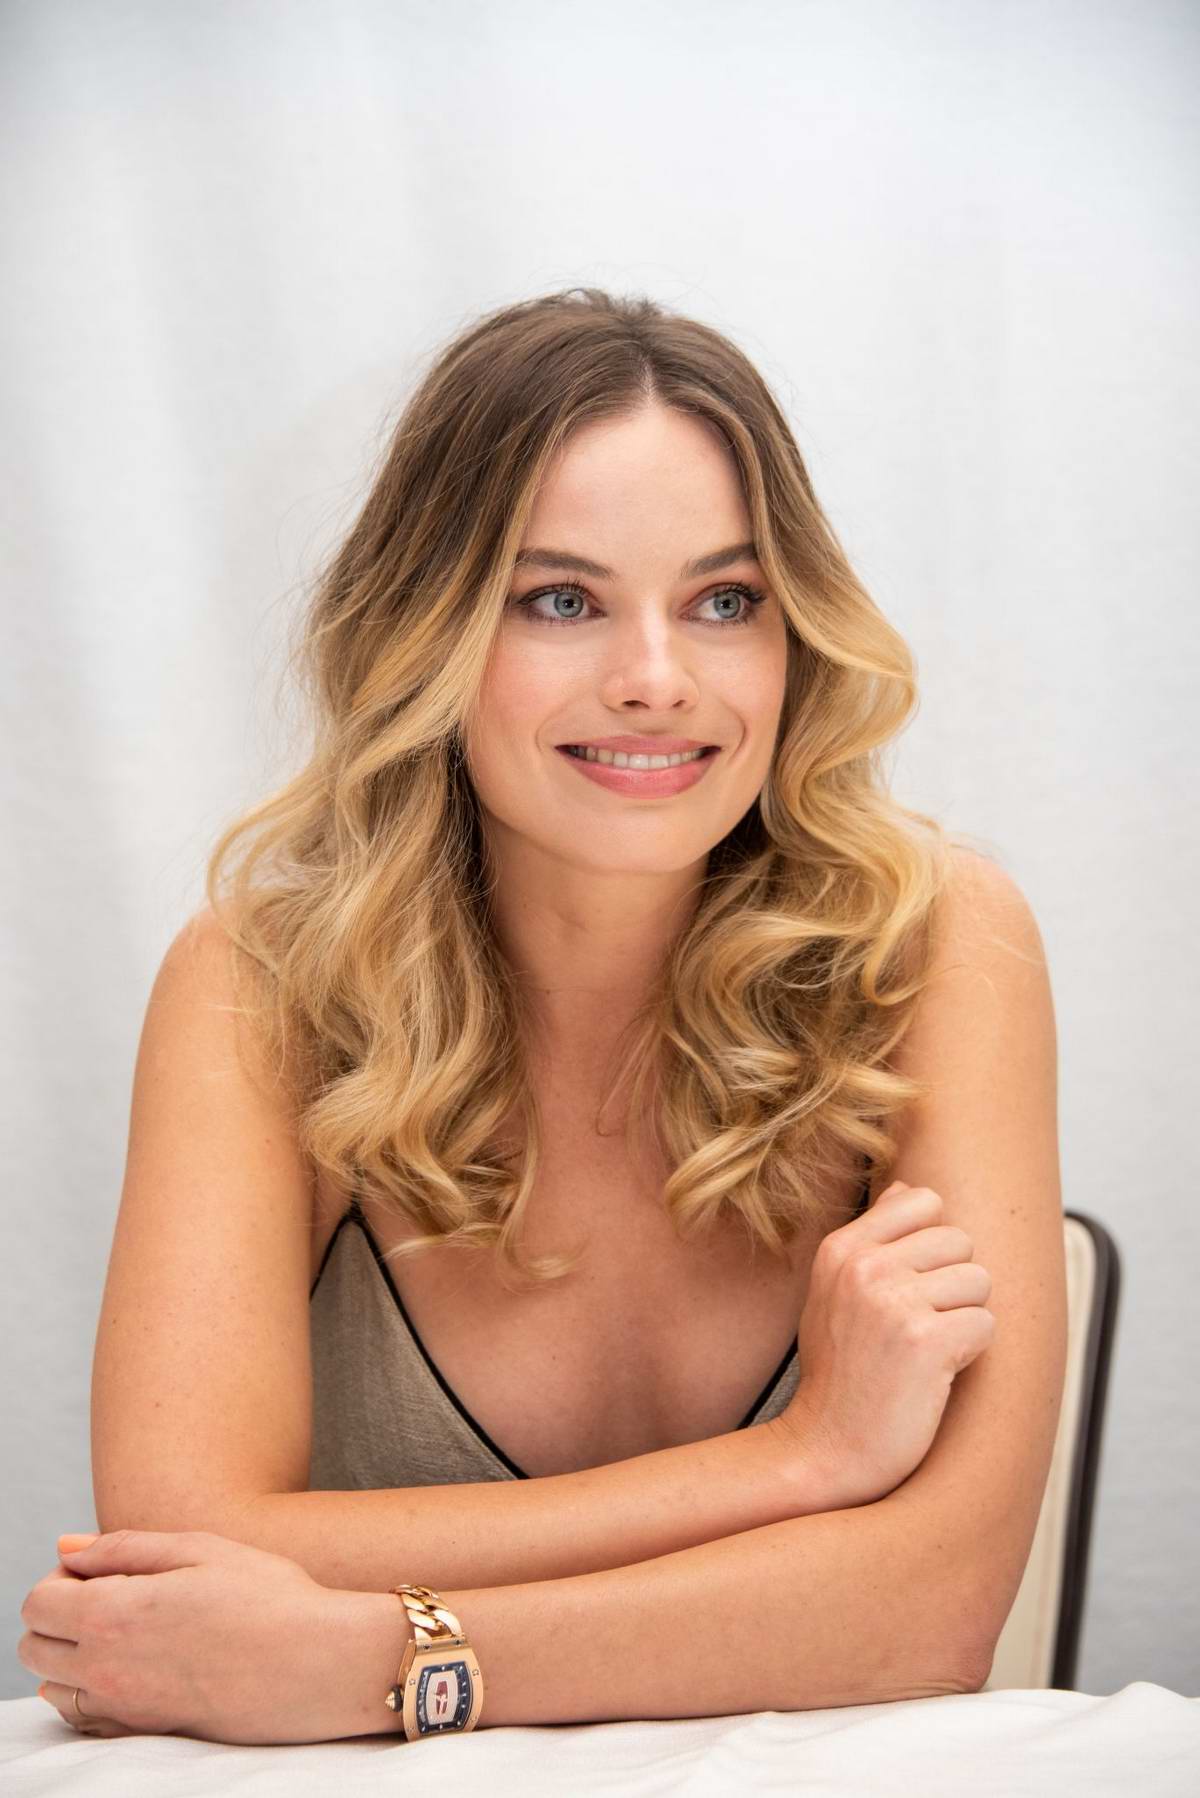 Margot Robbie July 2019 Cover: The Actress on Once Upon a Time in  Hollywood, Marriage, and MeToo